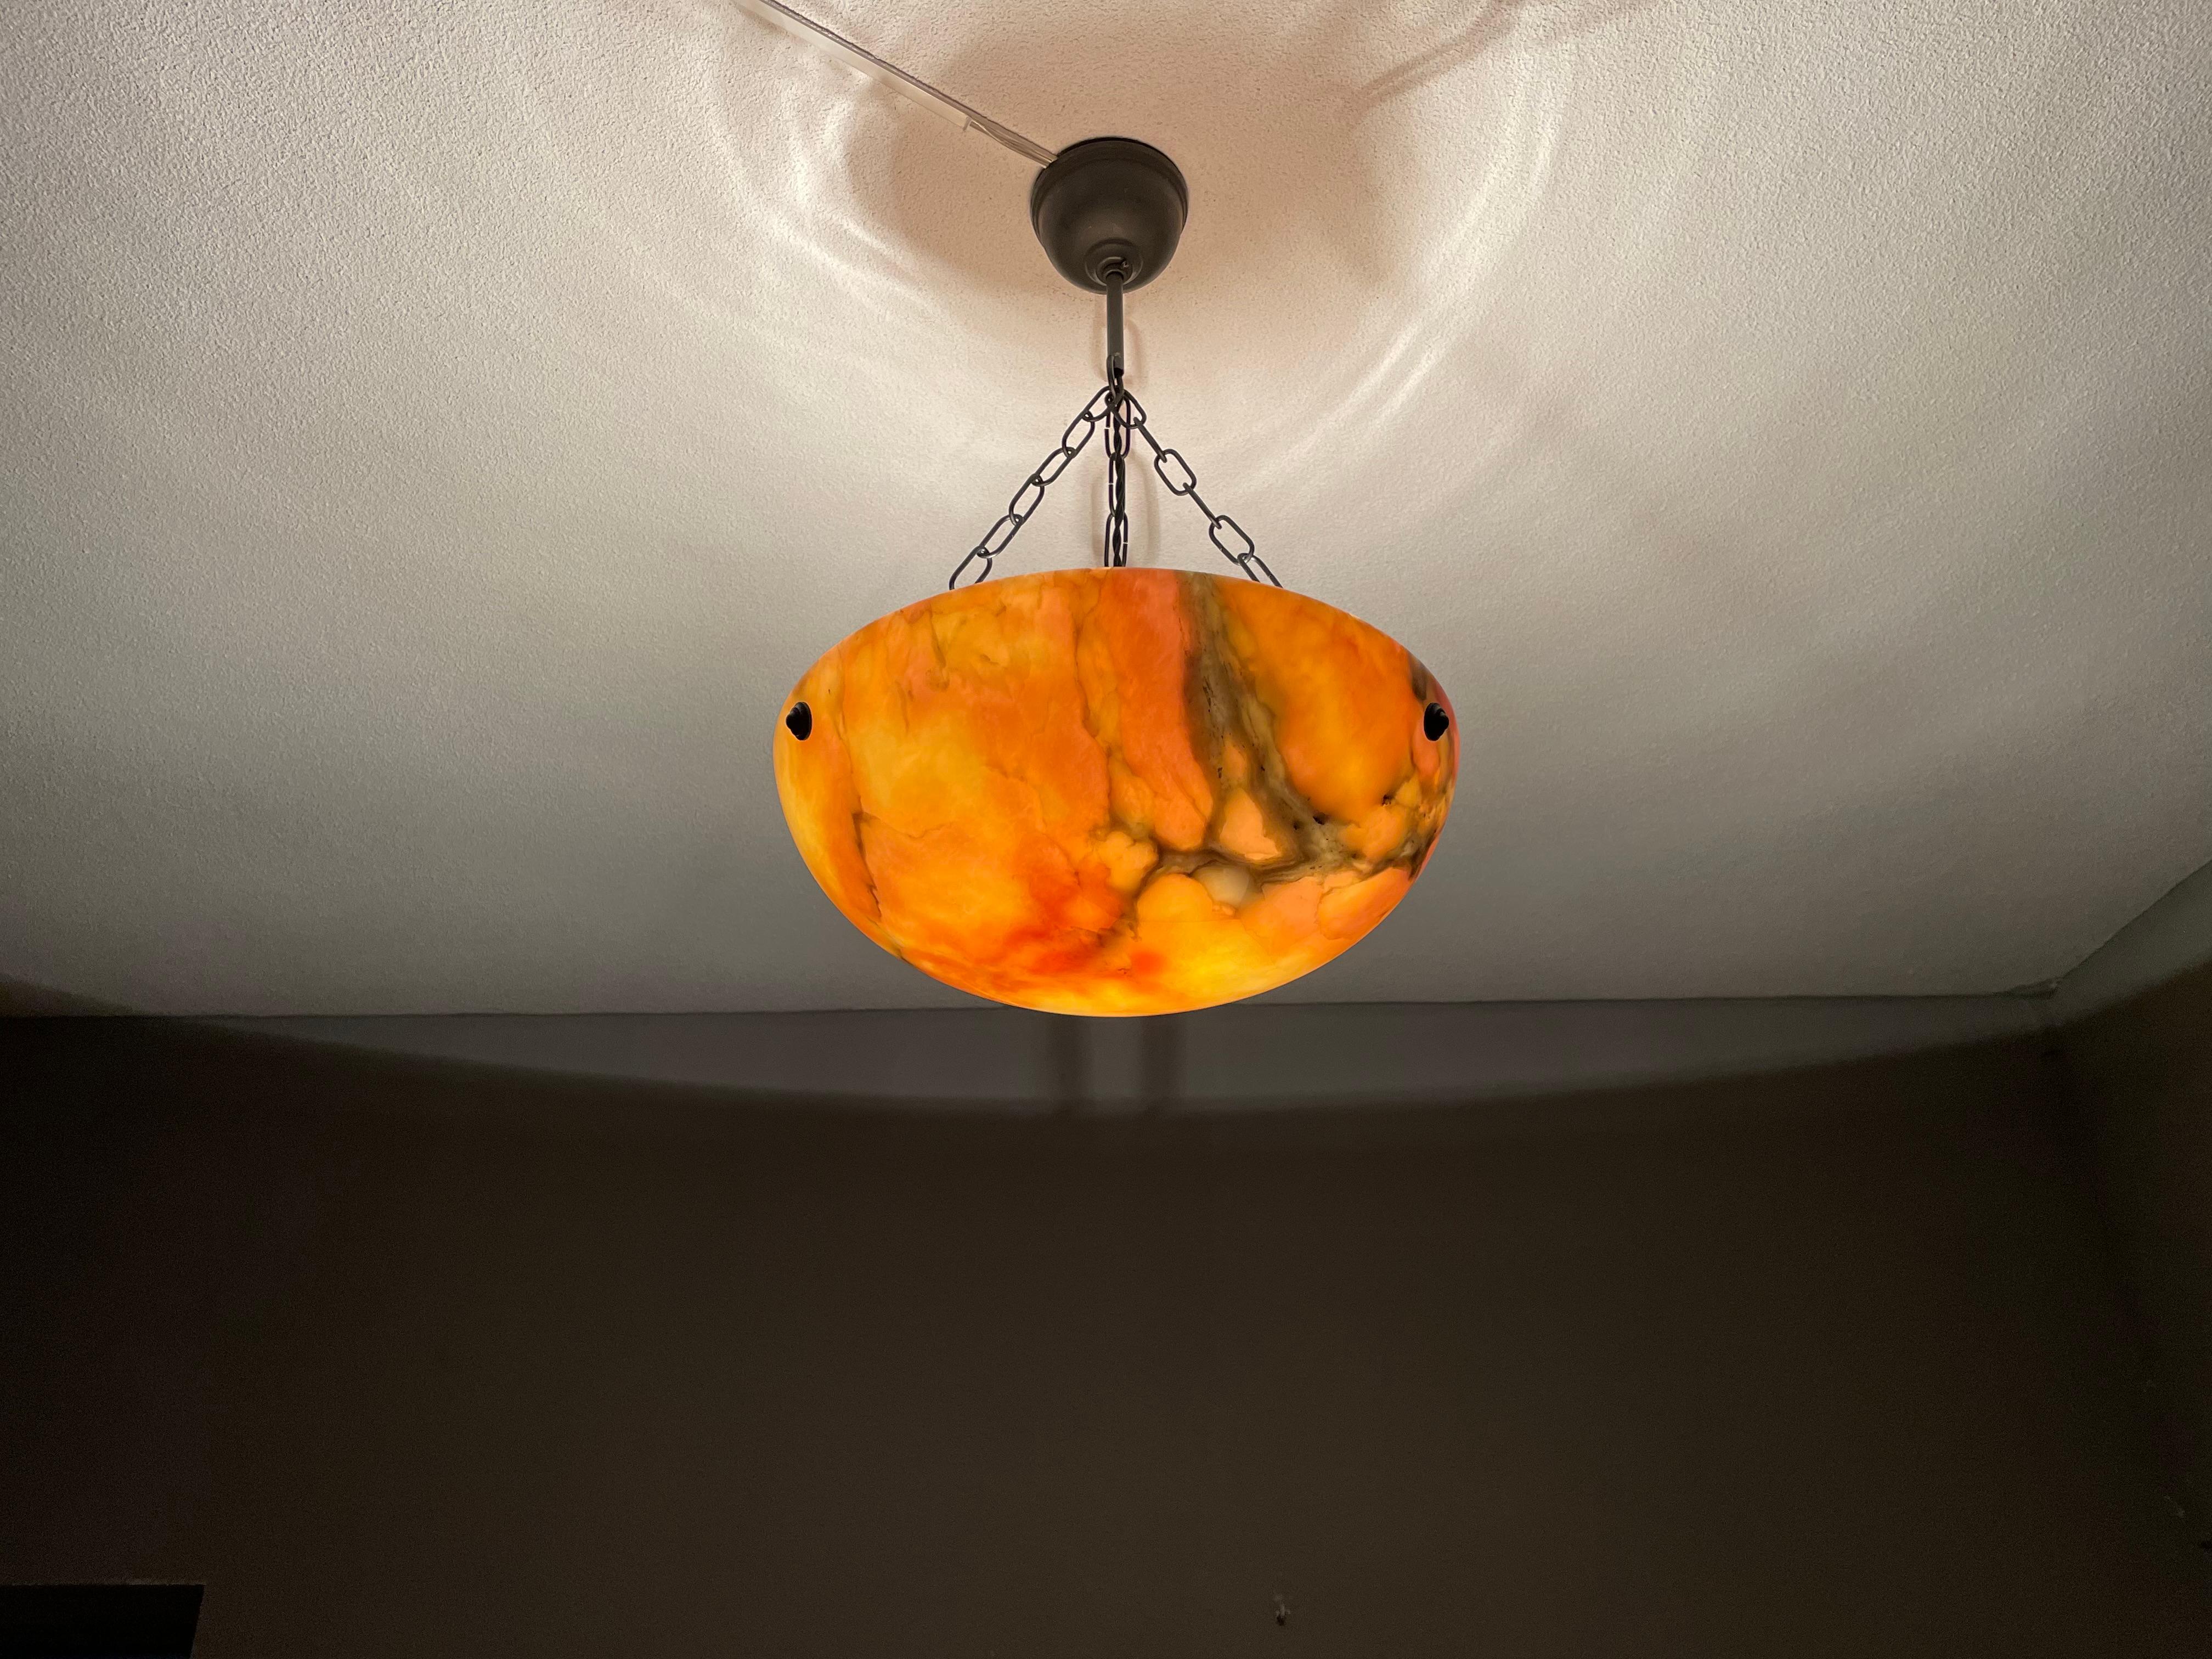 Great condition and stunning natural veins and patterns alabaster pendant.

Thanks to its practical size, its perfectly rounded shape and its timeless design this alabaster chandelier is bound to light up both your days and evenings. It is in superb